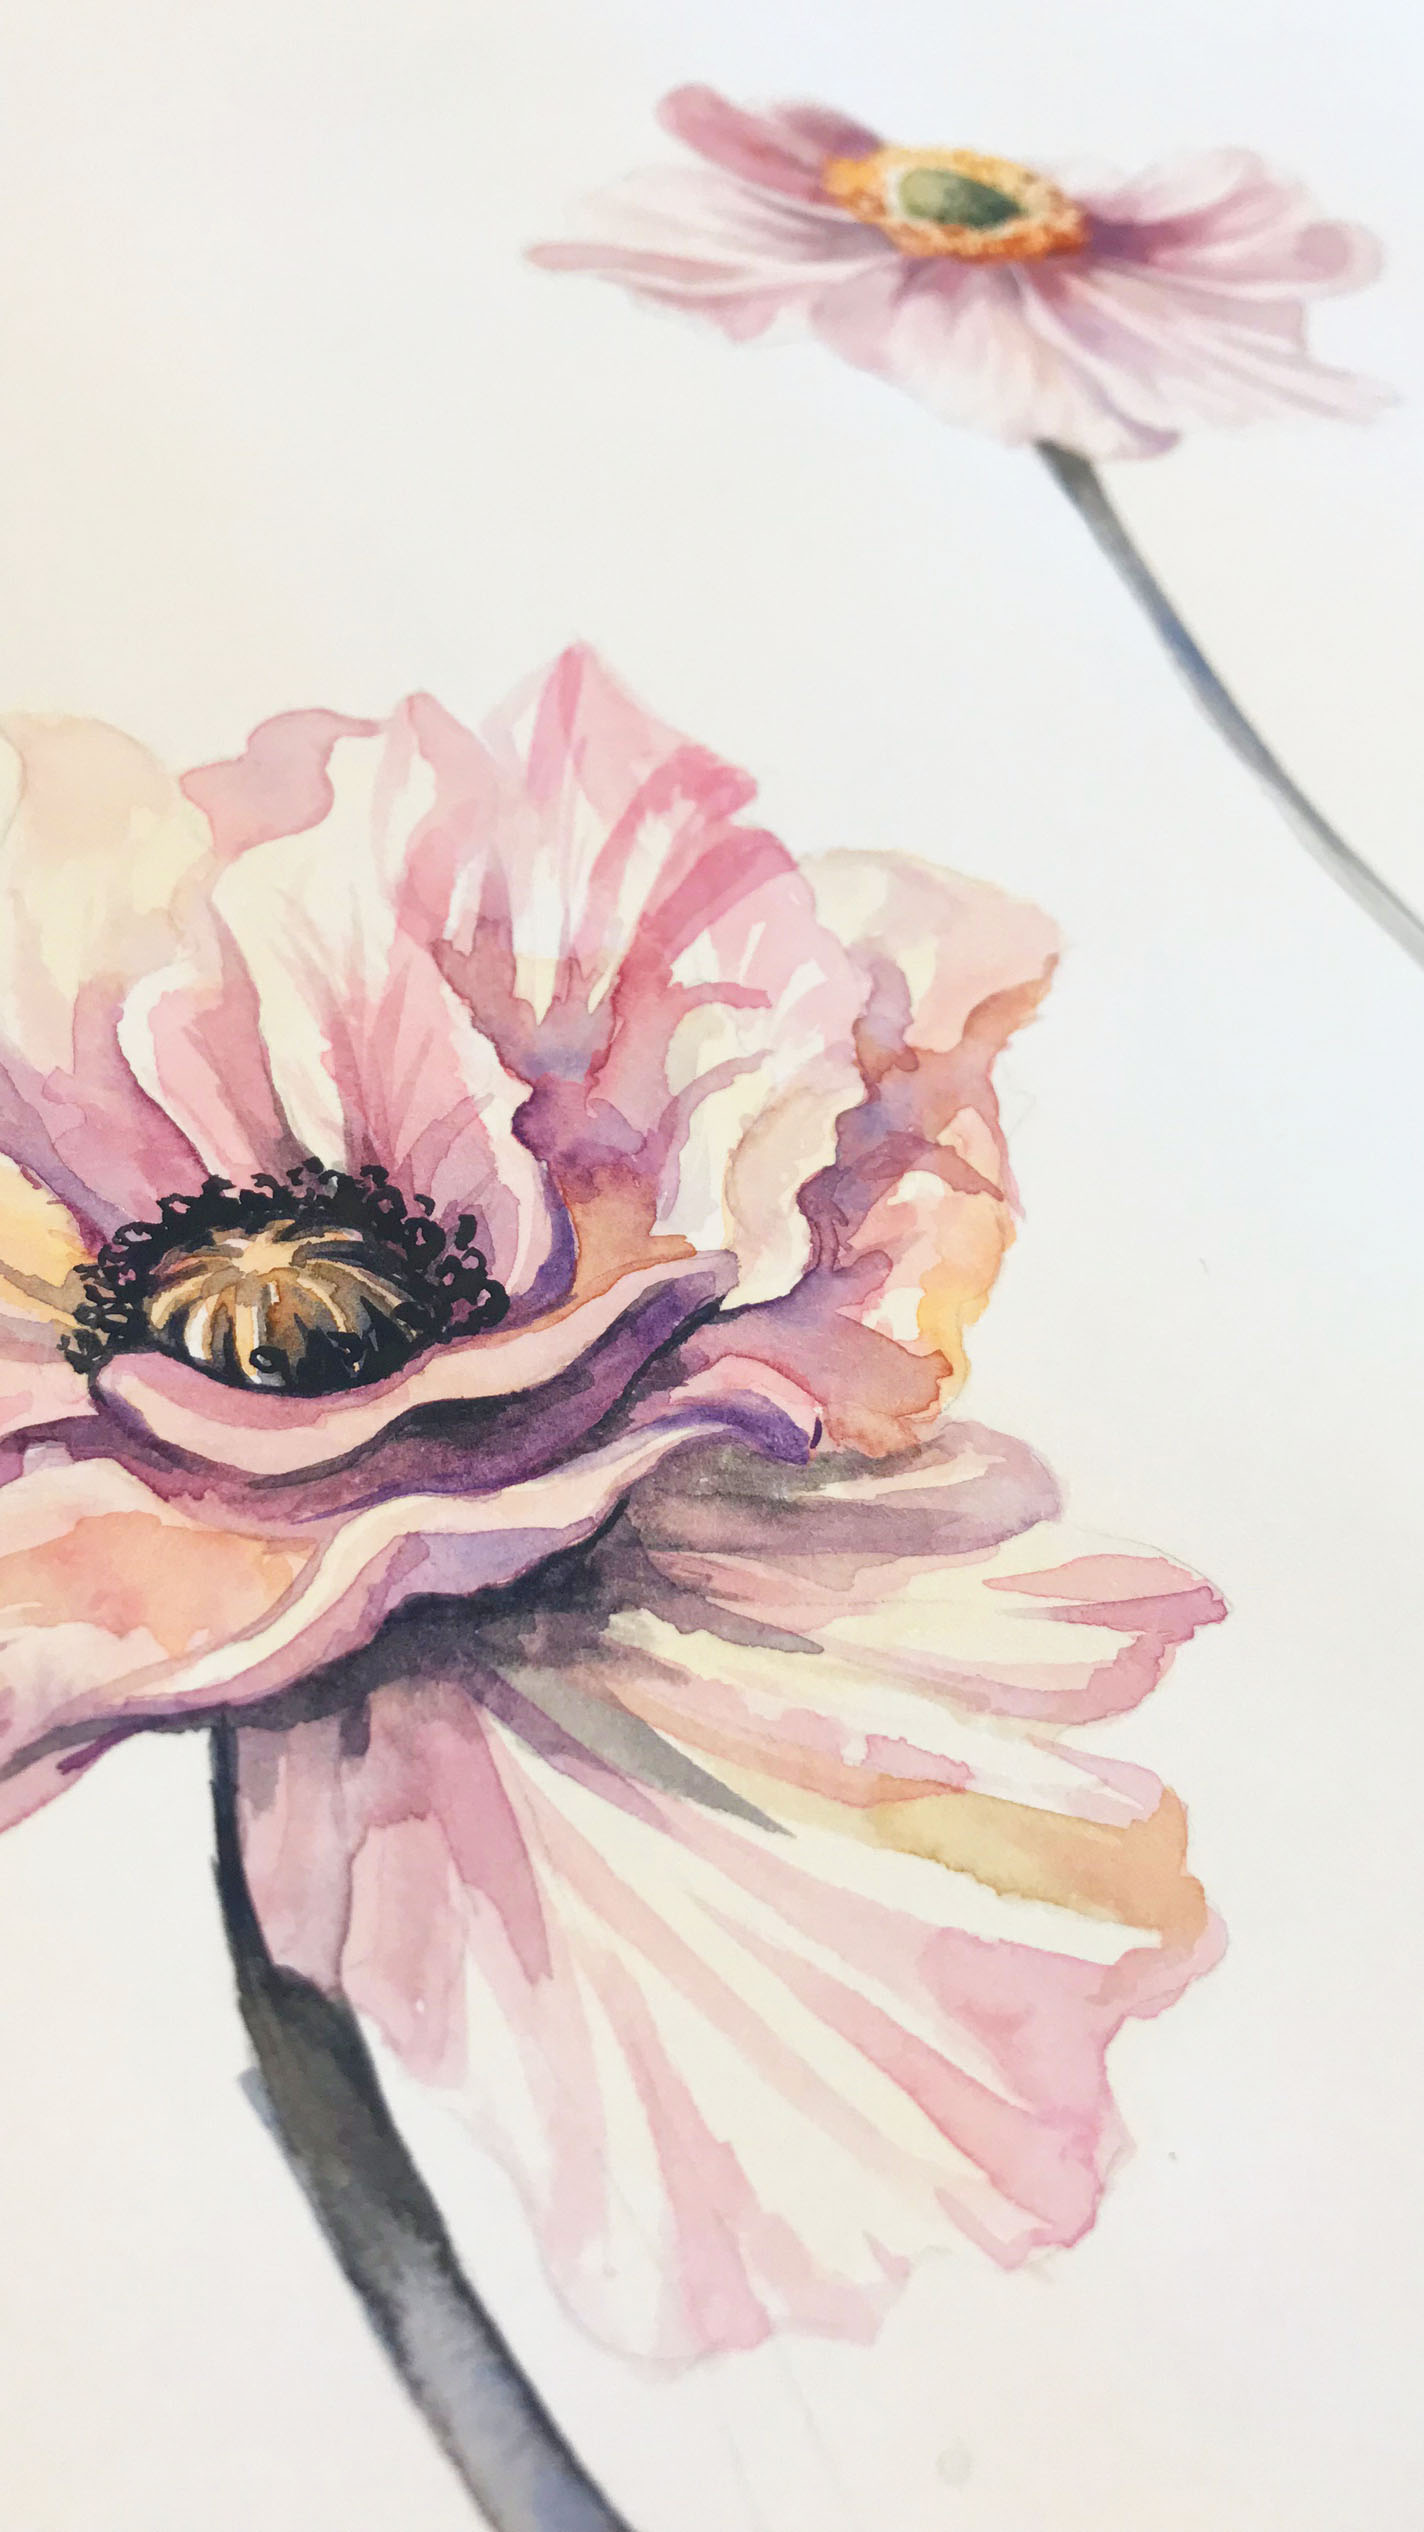 Artwork detail for 'Poppy Fields' from H&amp;M Conscious Collection Spring 2019